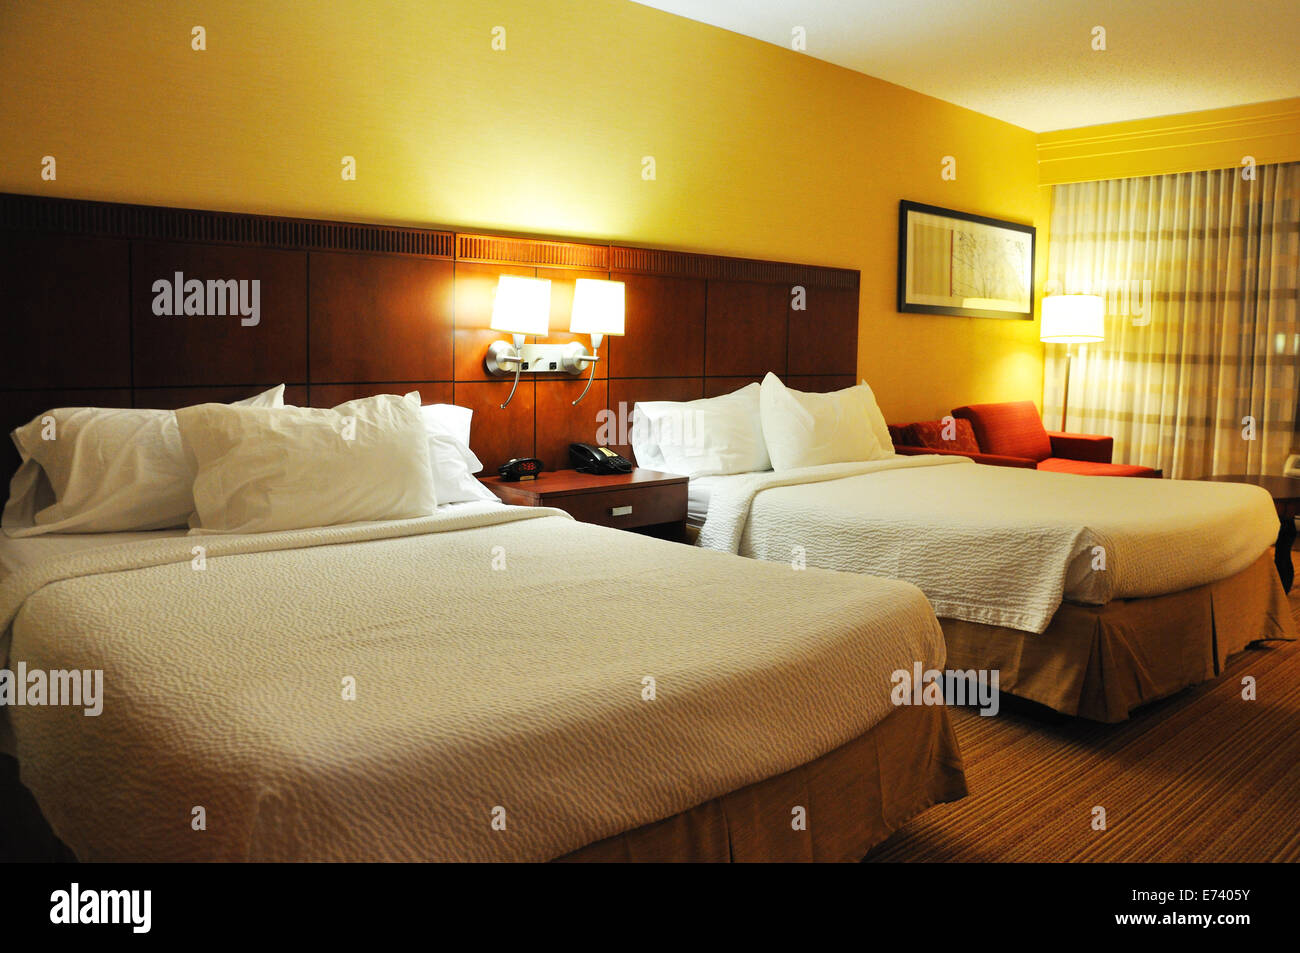 Courtyard by Marriott hotel room Stock Photo